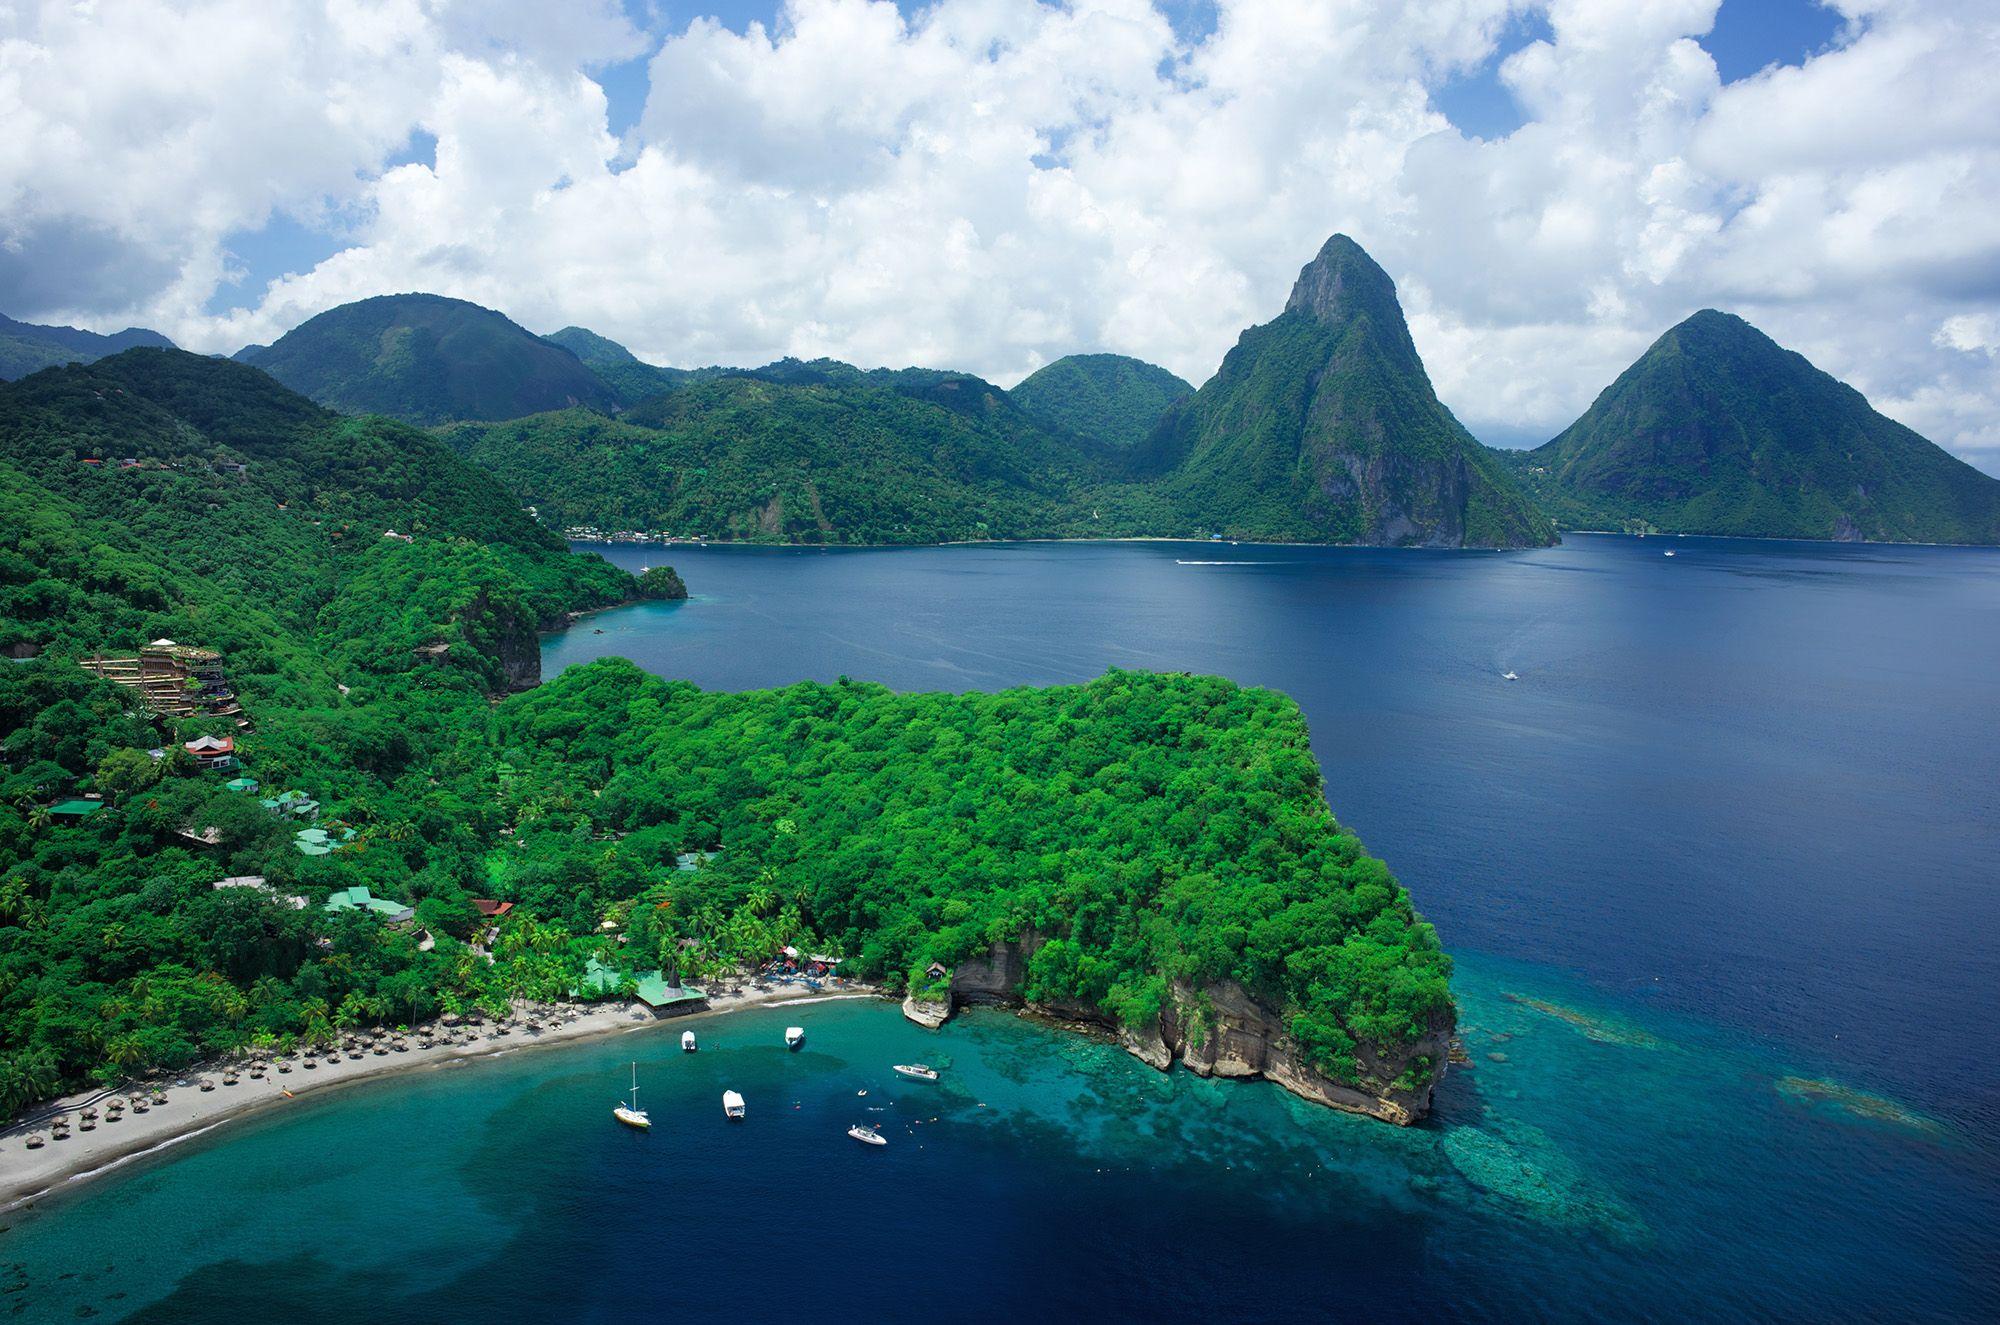 Reasons to Make St. Lucia Your Next Dive Destination